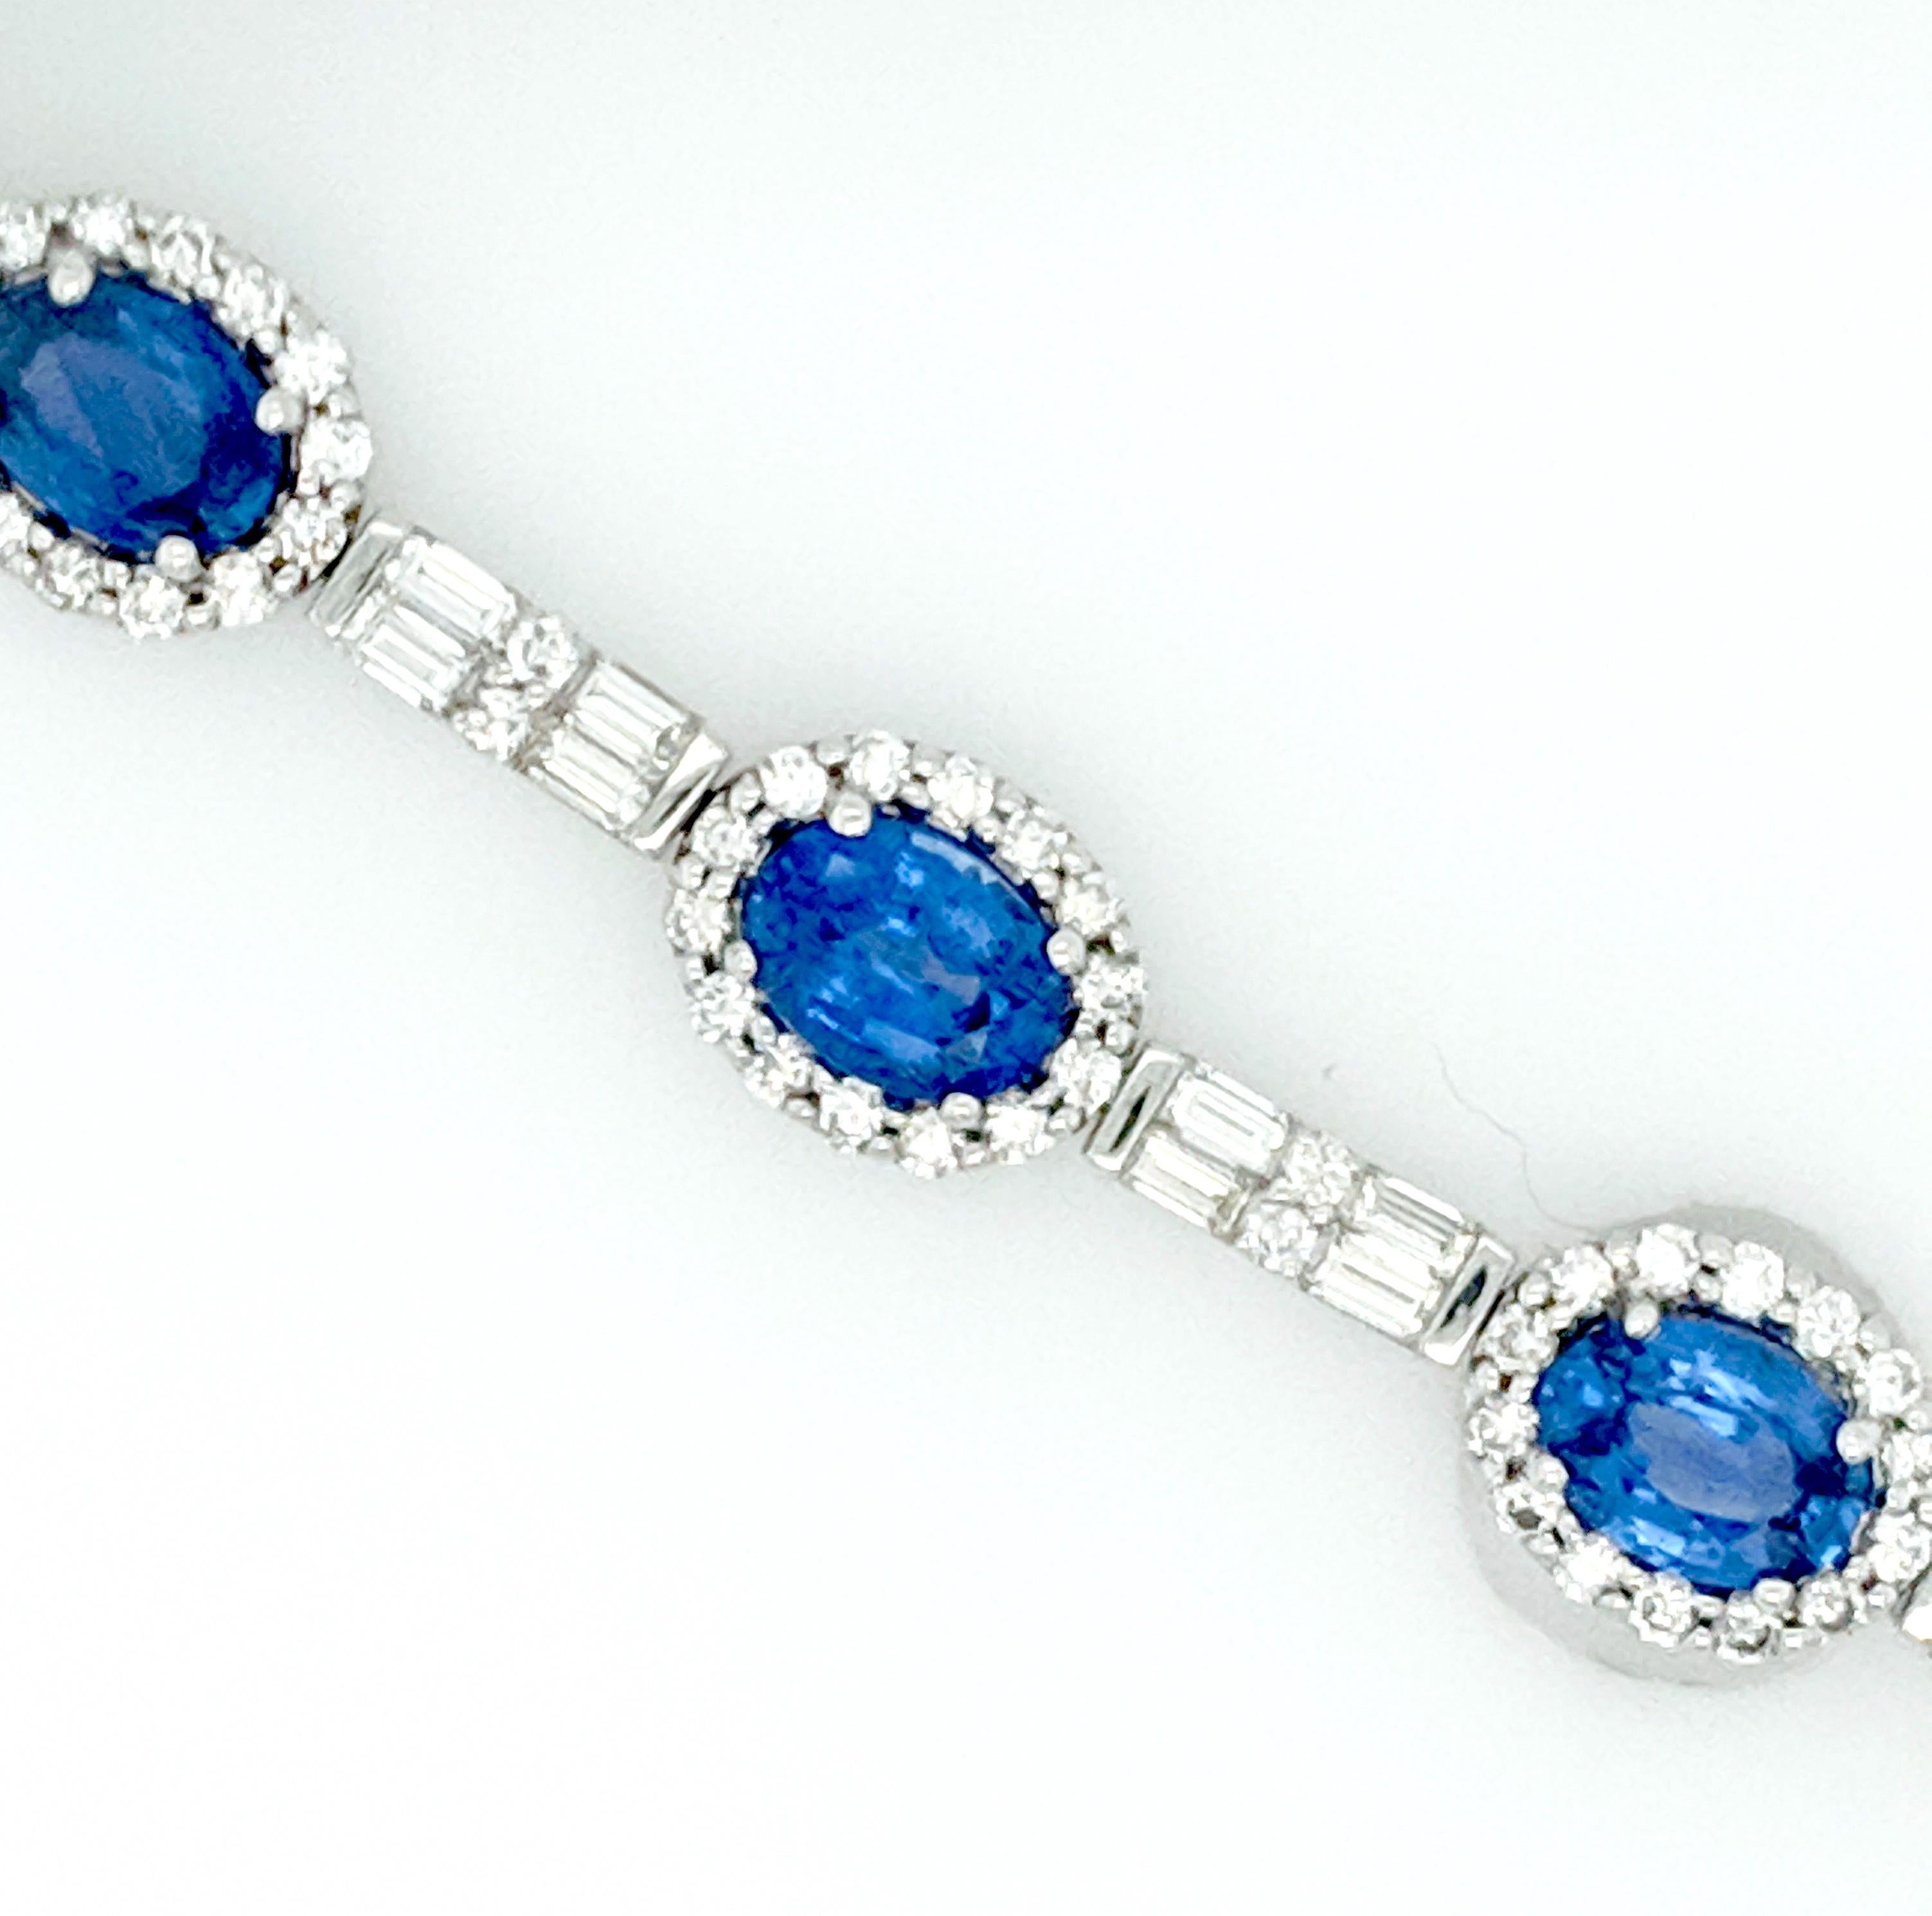 The Sapphire and Diamond bracelet is crafted in 18K white gold and features (9) oval fine color ceylon  sapphires weighing approximately 8.19cttw with 144 round diamonds weighing approximately 2.10cttw with a color of G/H and a clarity of SI1-2 and